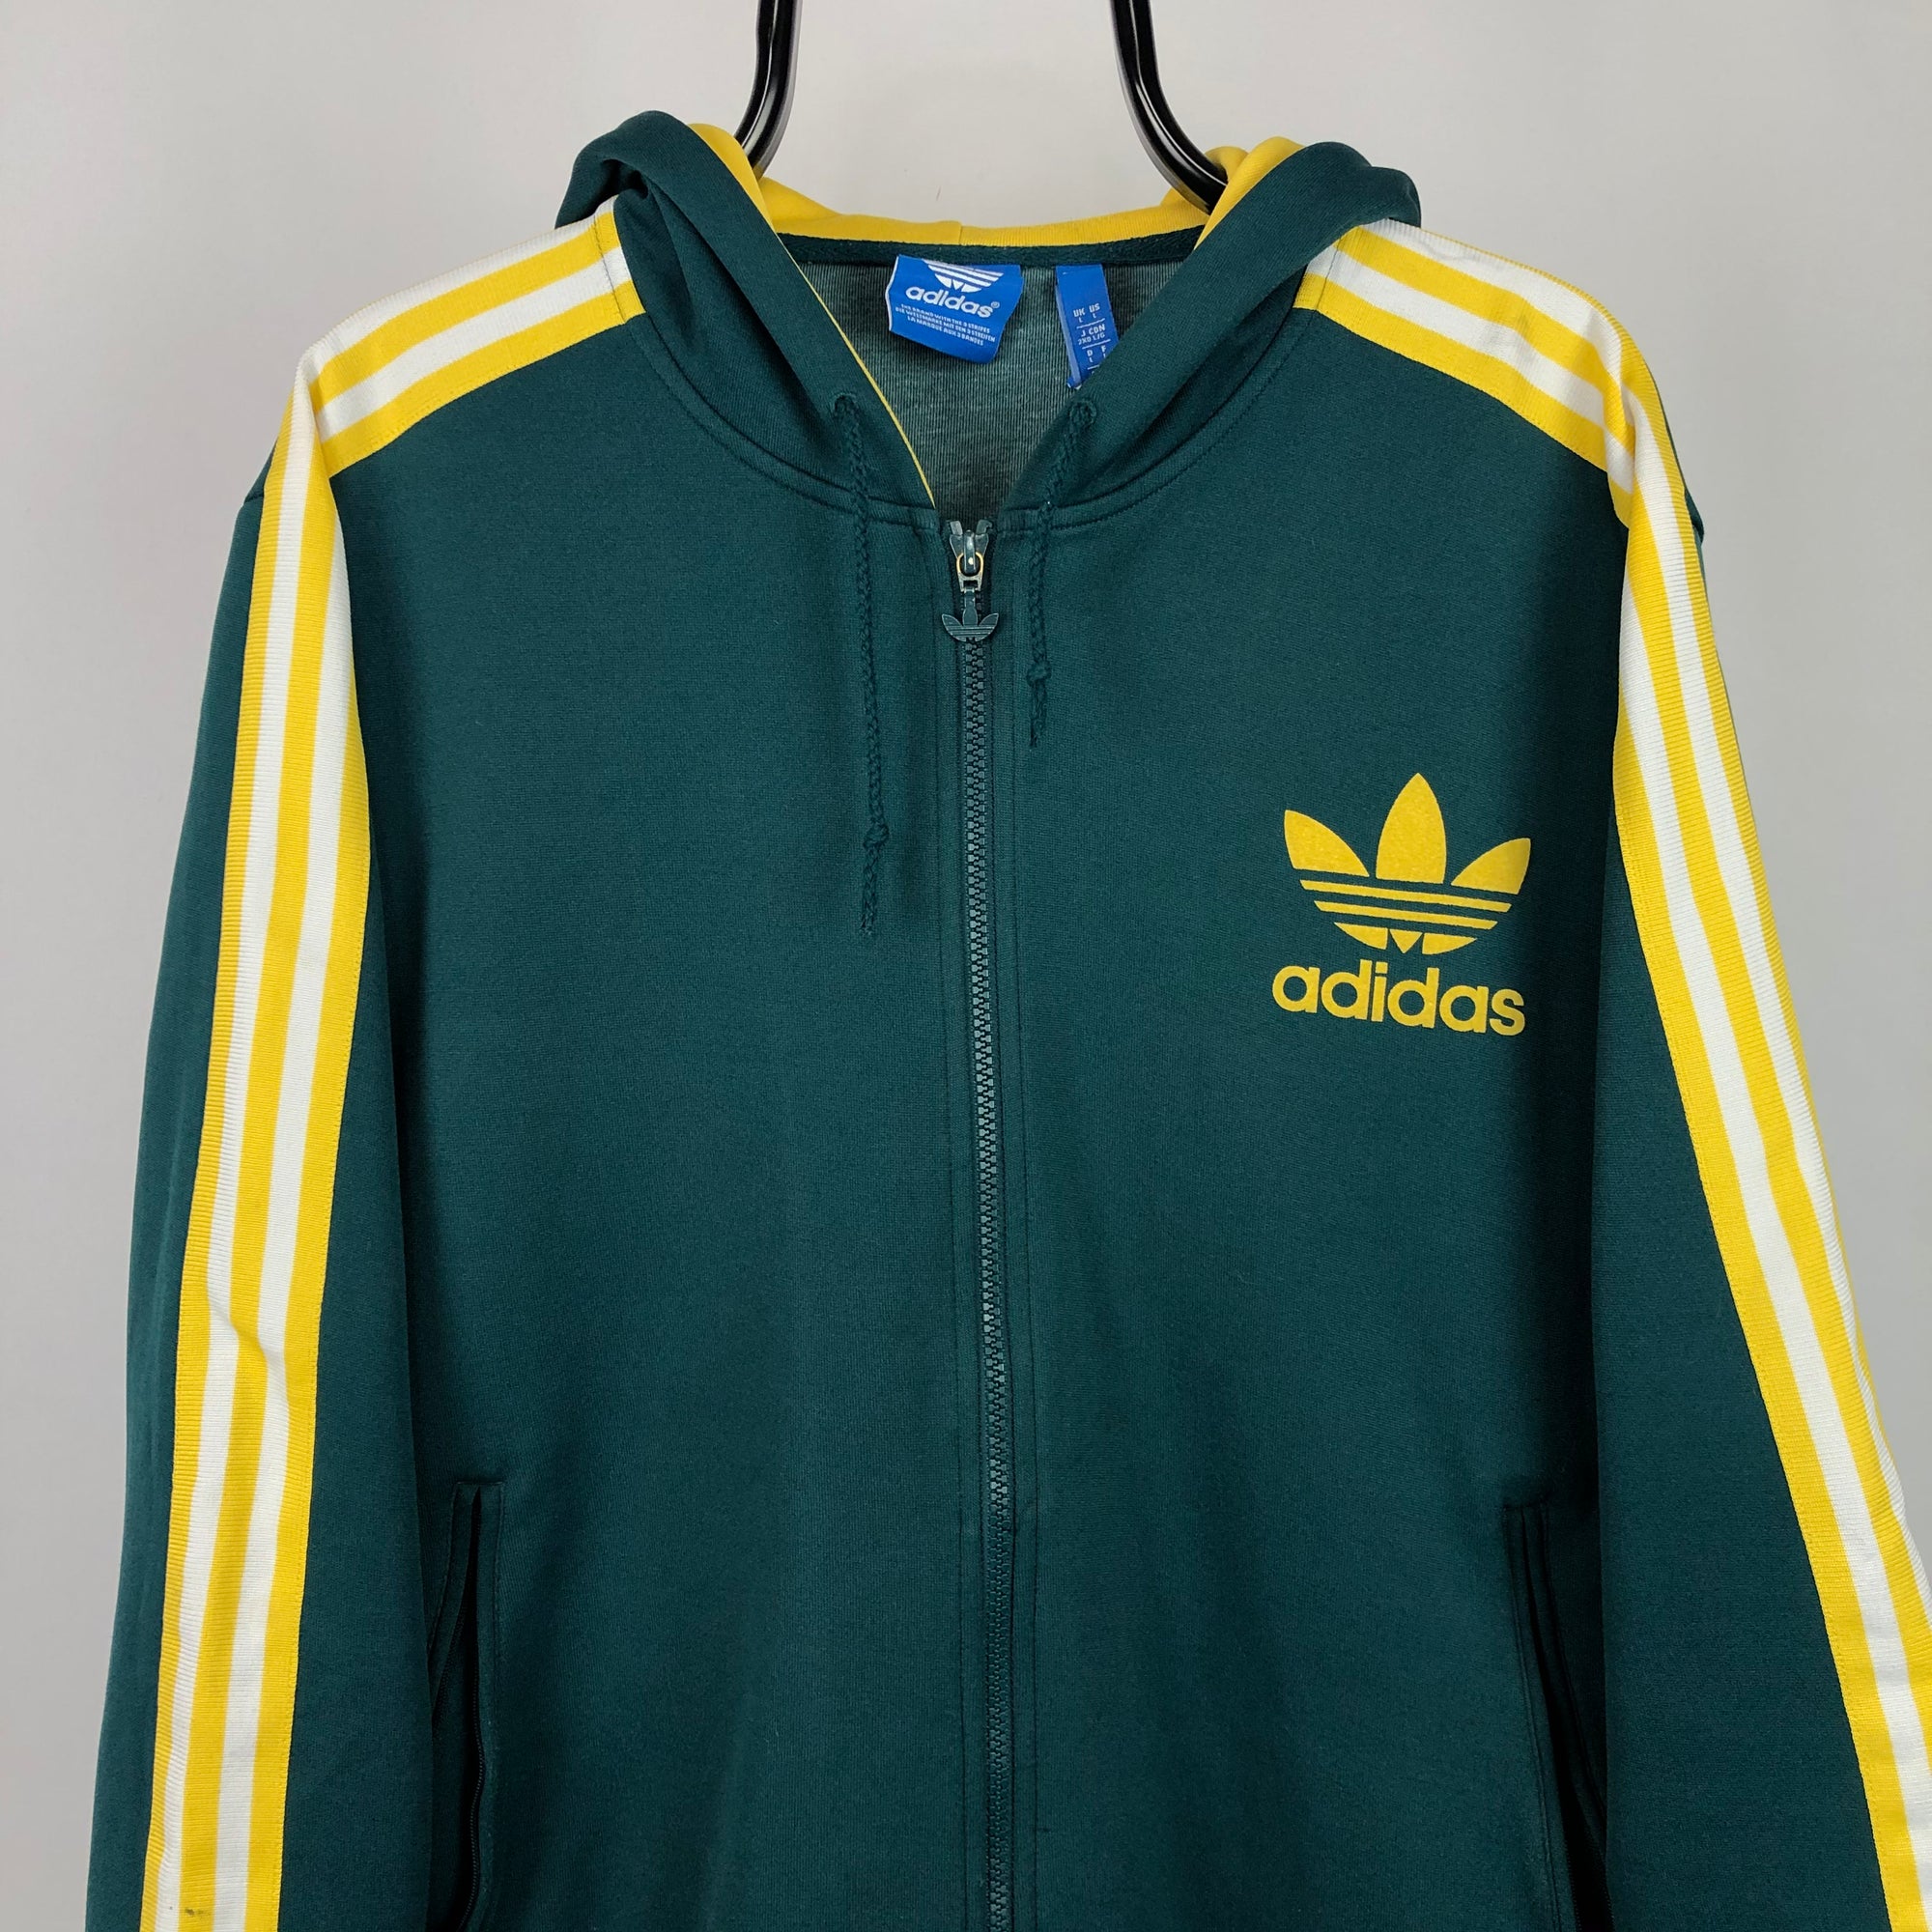 Adidas Hooded Track Jacket in Green/Yellow/White - Men's Large/Women's XL